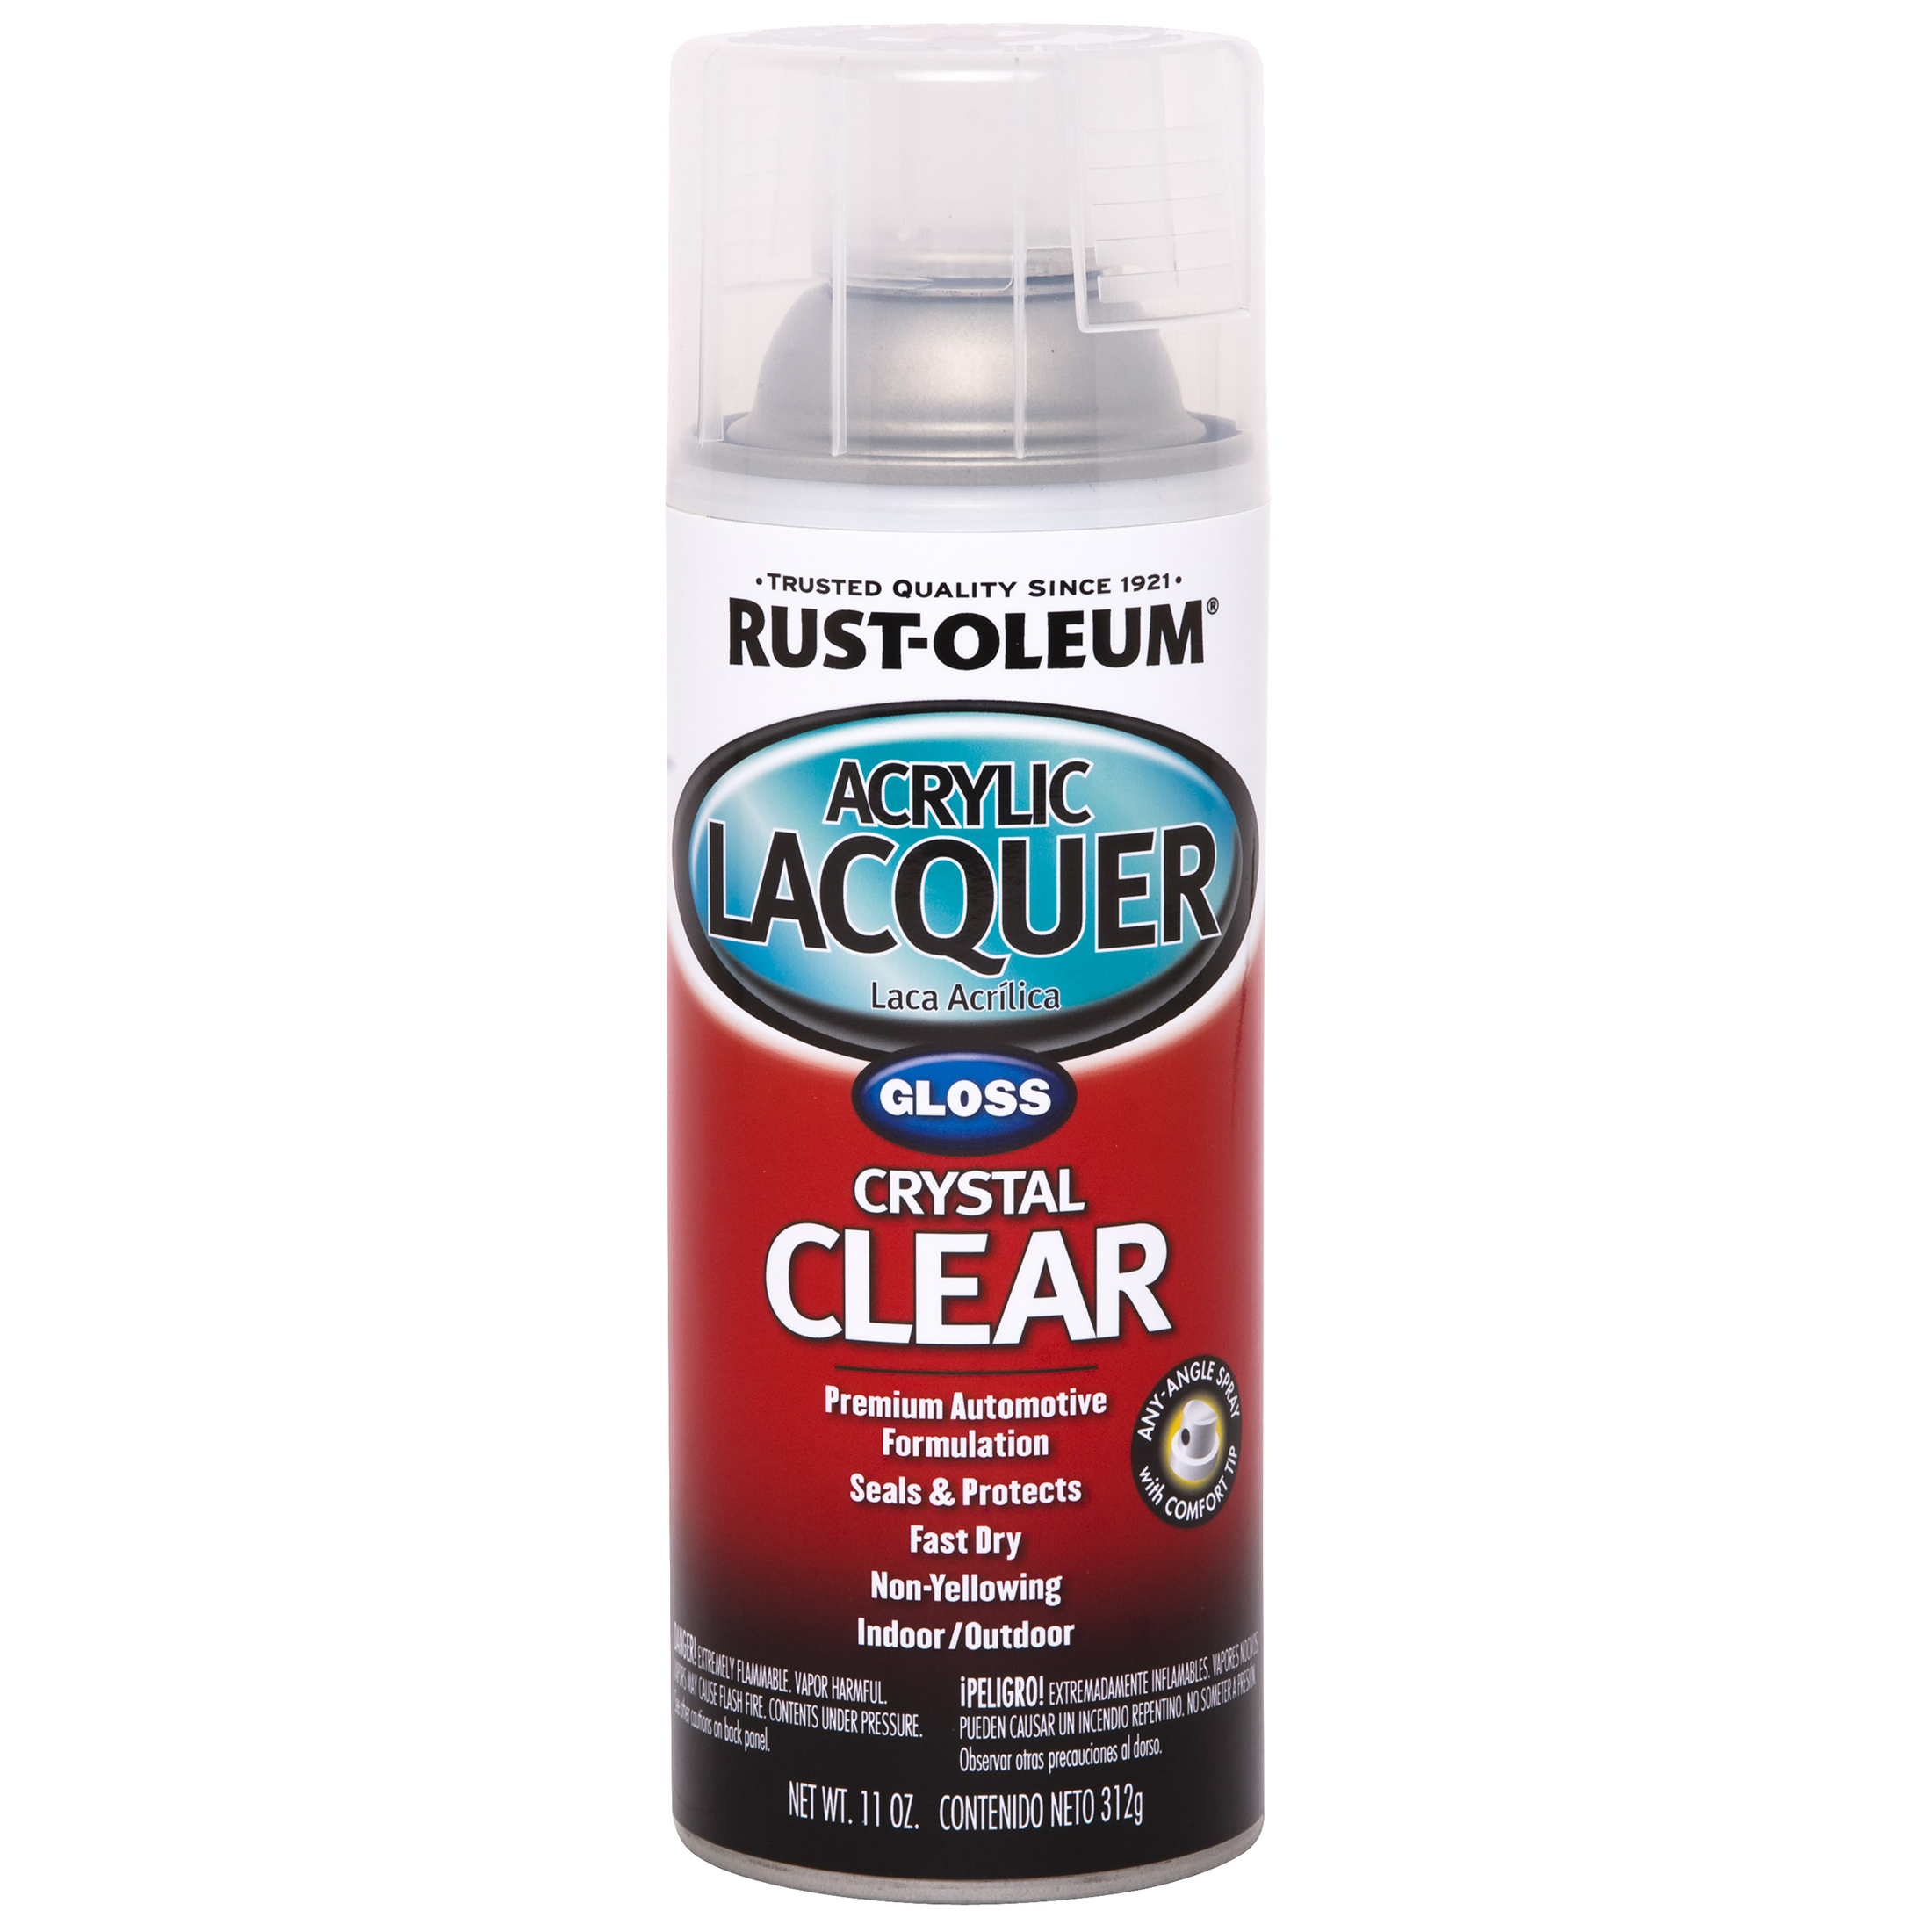 Clear, Rust-Oleum Automotive Gloss Acrylic Lacquer Spray Paint-253366, 12 oz - image 1 of 9